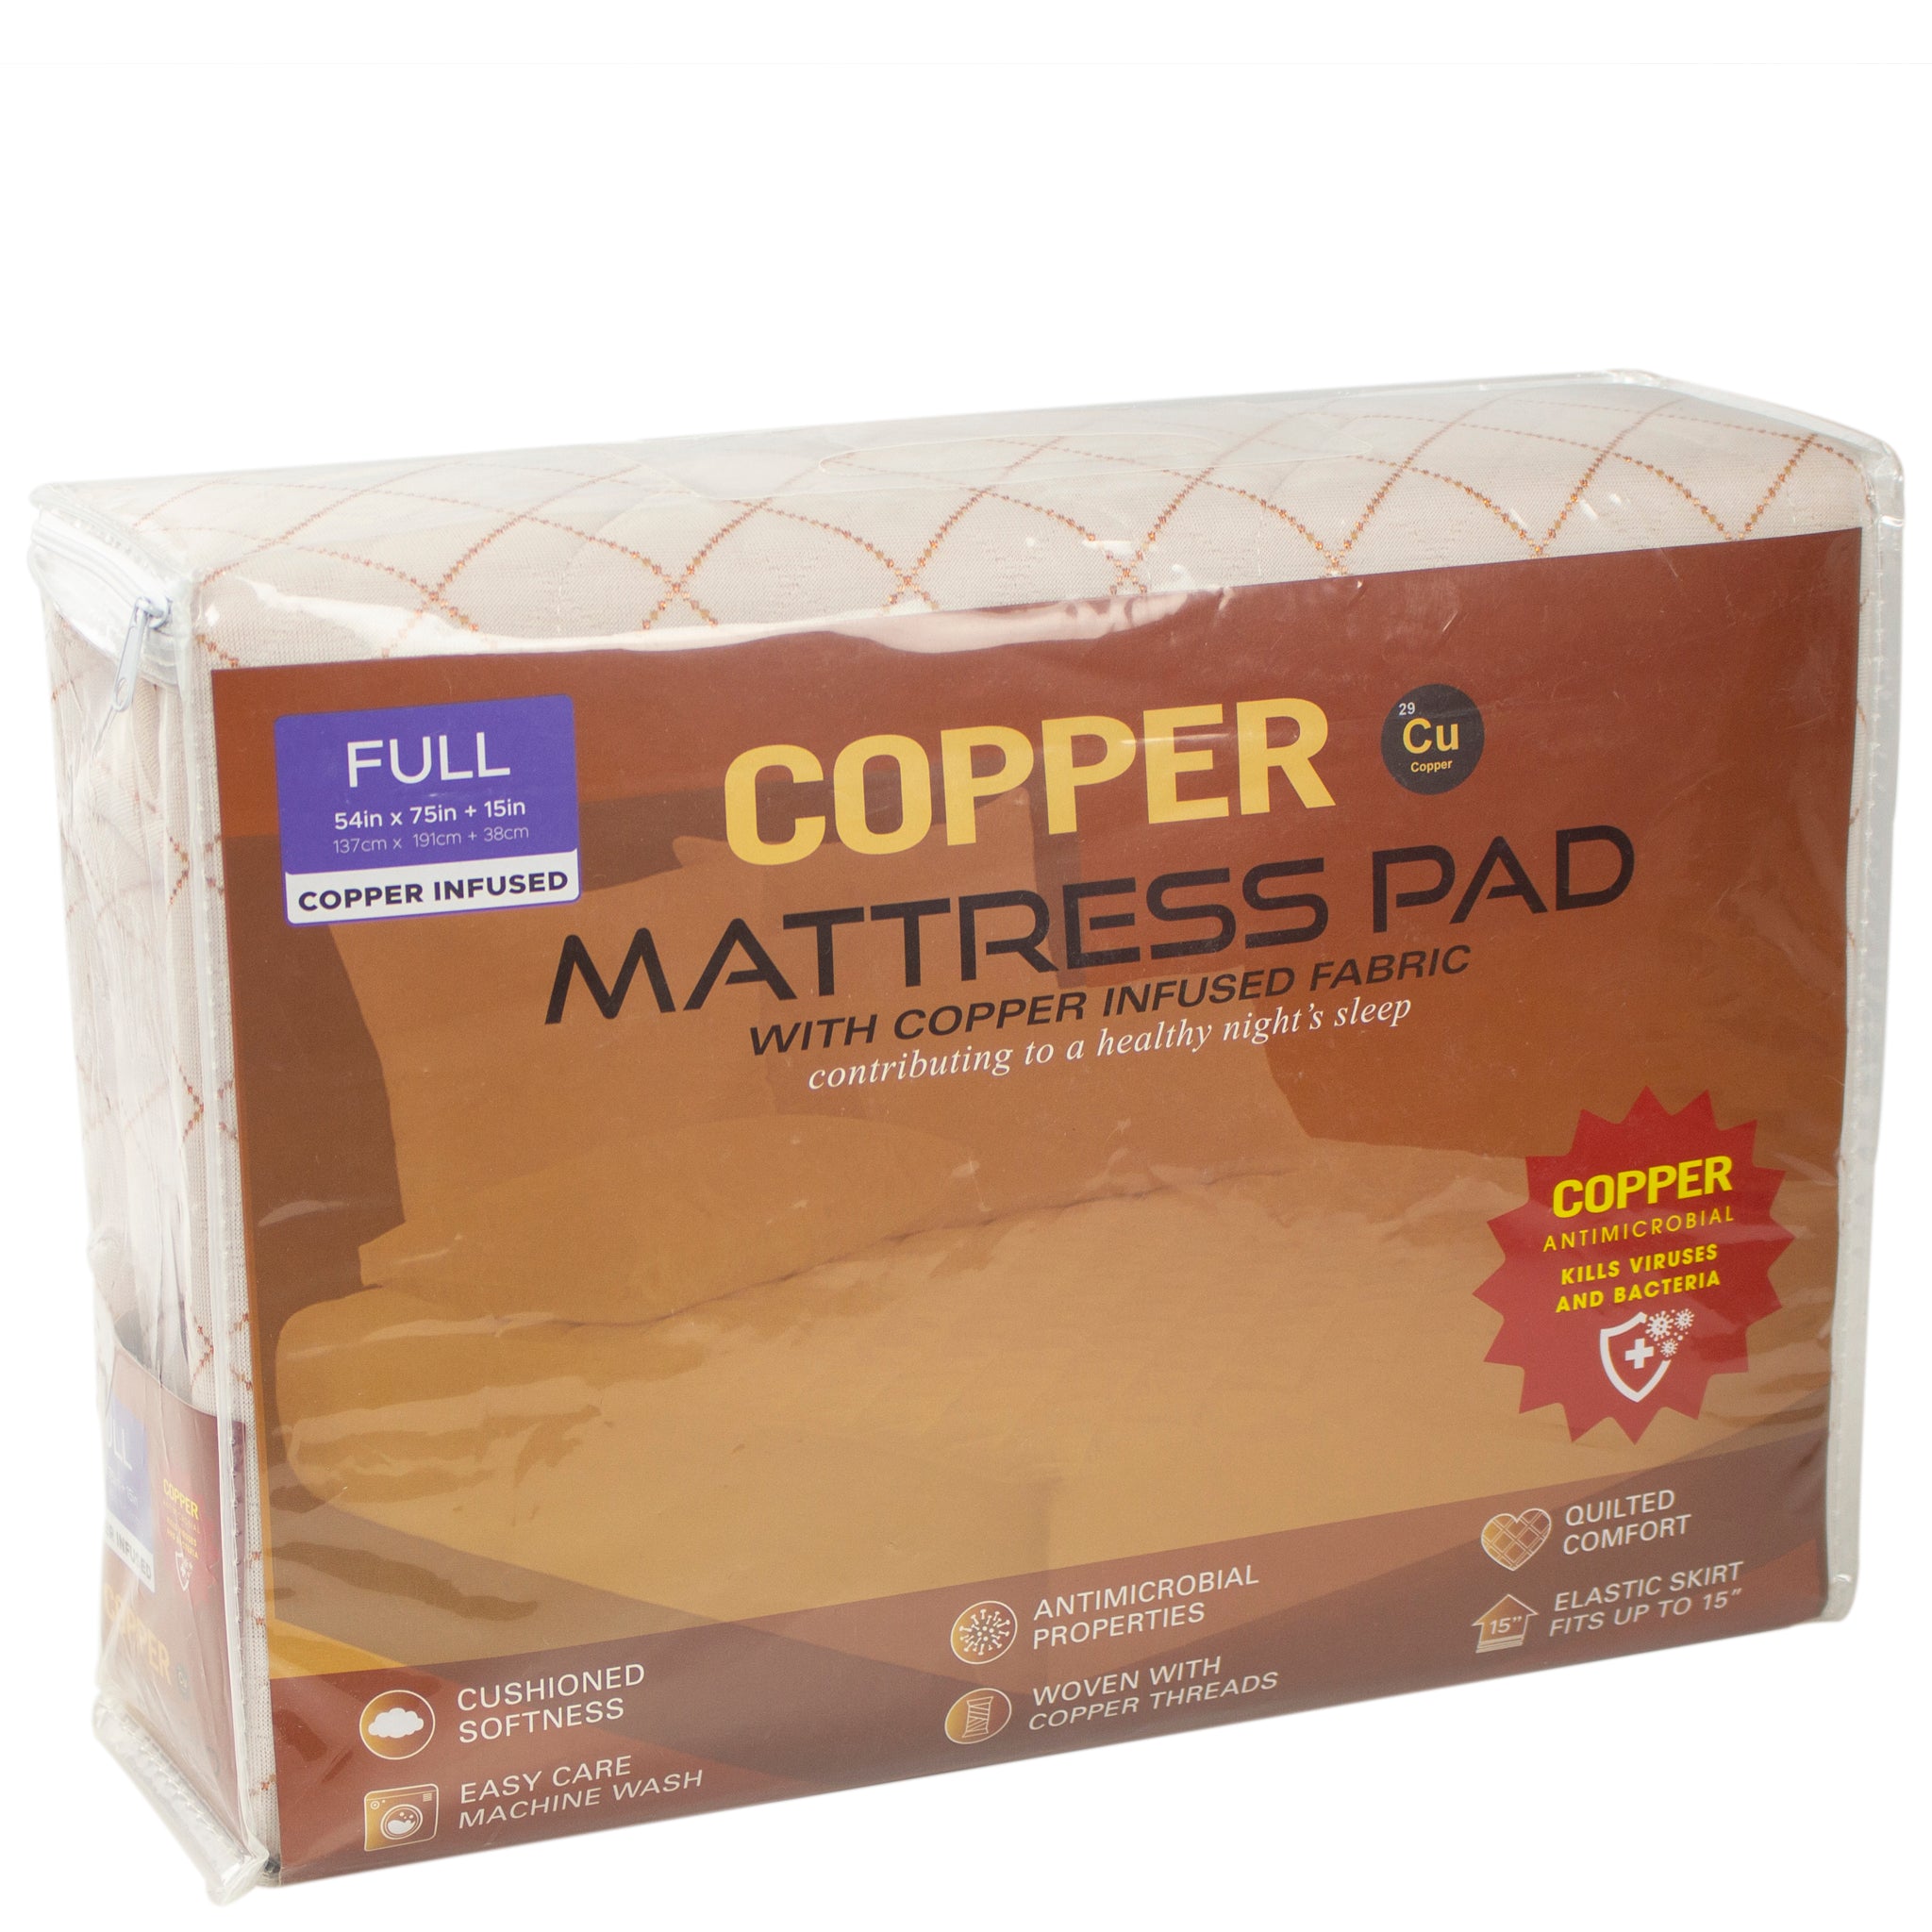 Benefits of Copper Infused Fabrics in a Mattress – SleepNation